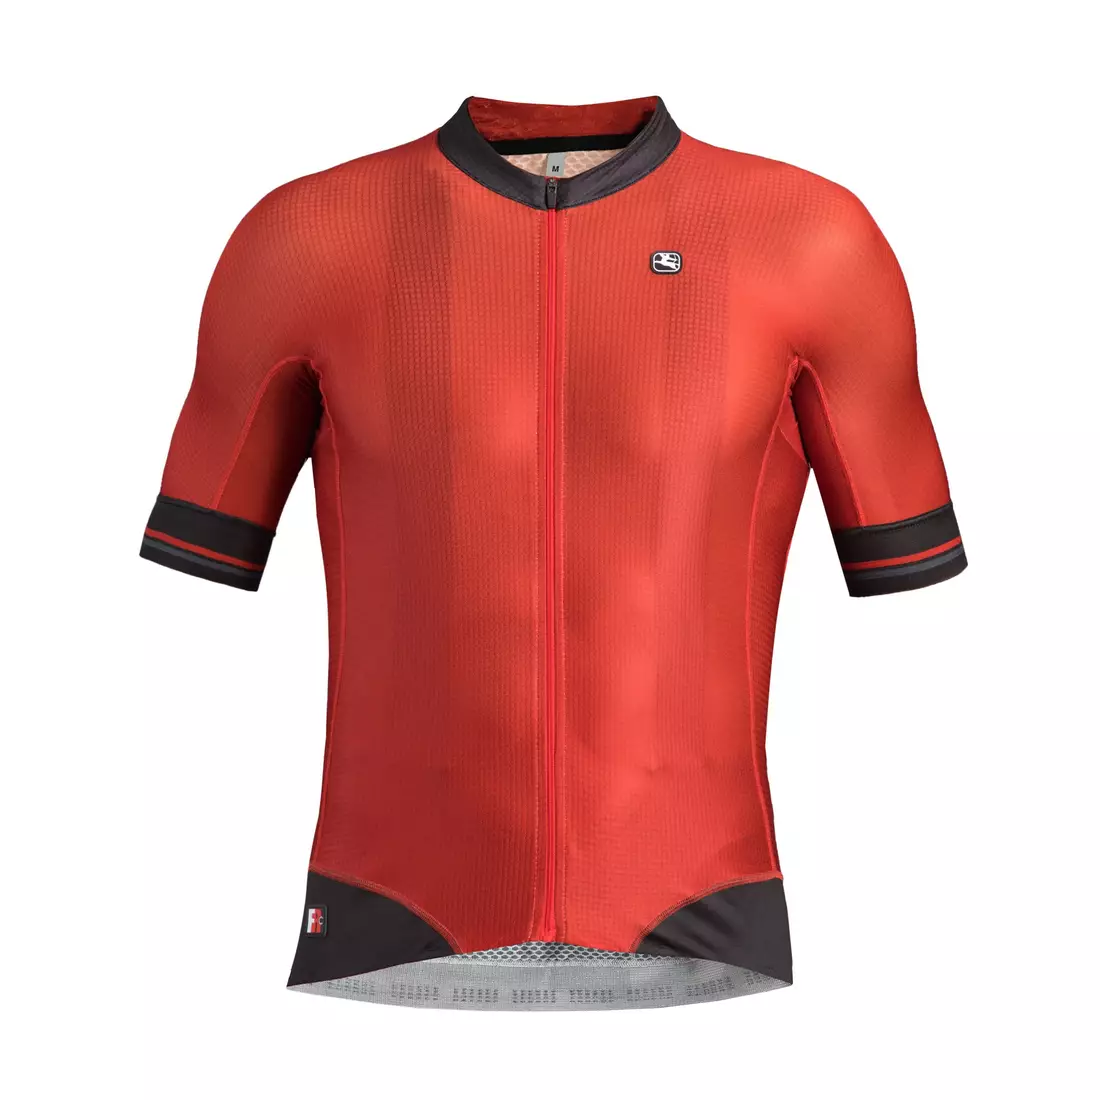 GIORDANA FR-C PRO red cycling jersey